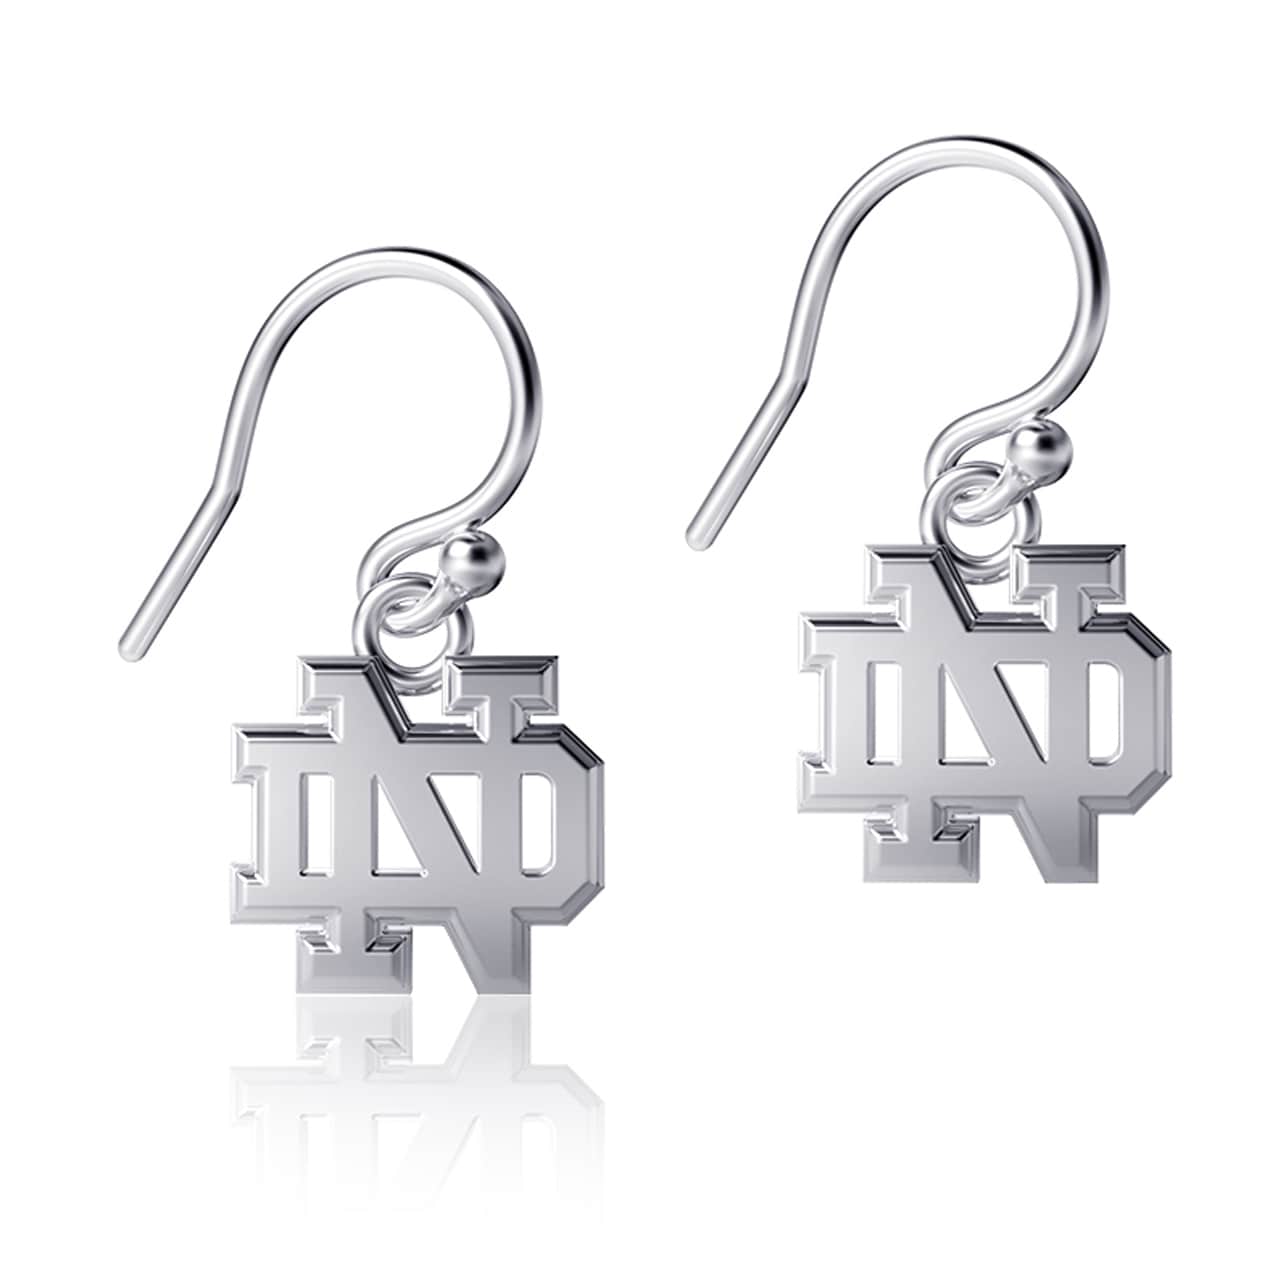 Dayna Designs Notre Dame Fighting Irish Silver Dangle Earrings - image 1 of 2